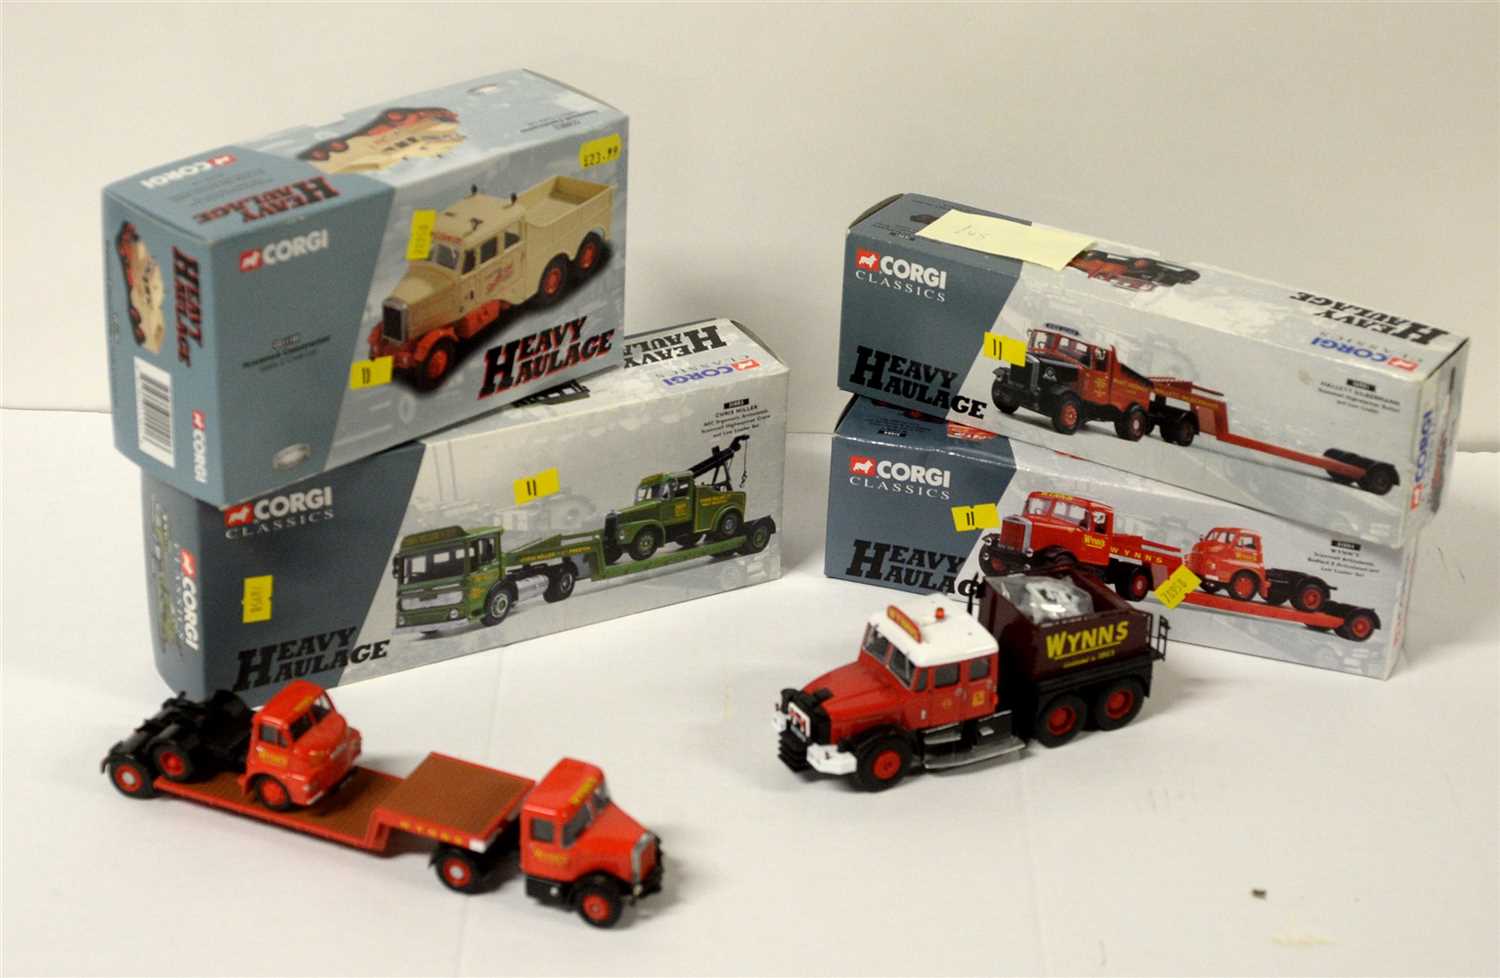 Lot 1262 - Limited edition die-cast model vehicles by Corgi.